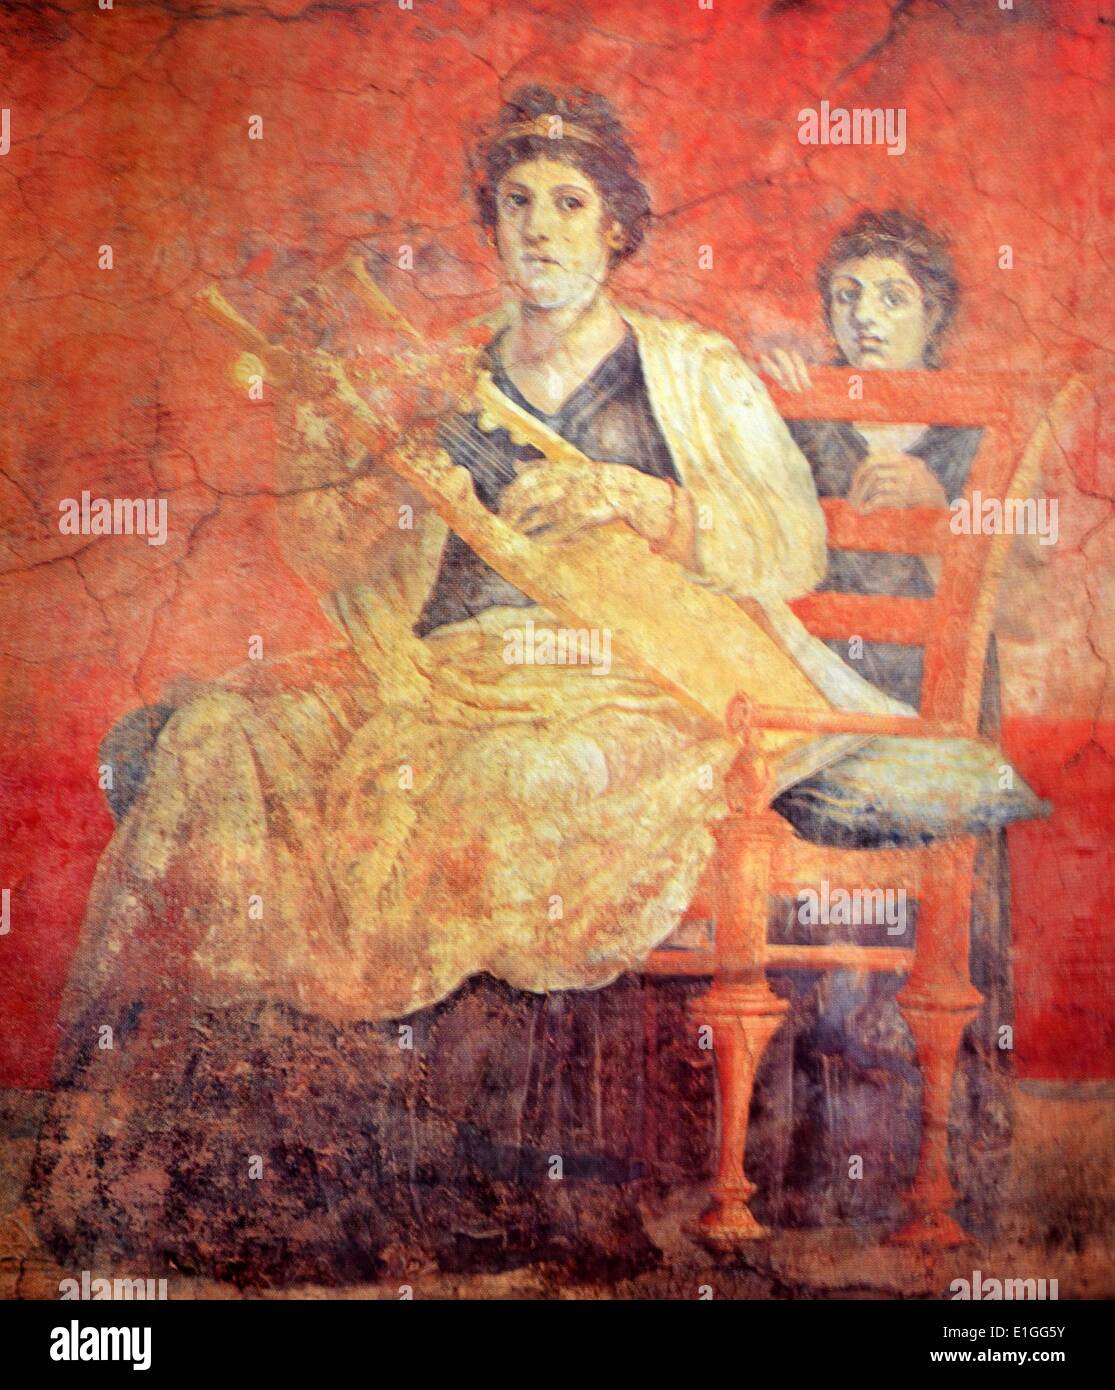 A Roman fresco, discovered in Pompeii, depicits a woman seated on a bronze chair, with a back, playing a Greek musical instrument called a Kithara. Chairs with a back for the Romans was a symbol of dignity or respect, reserved for high officials or woman of rank (the ceremonial use of thrones a vestige of this tradition) such as the woman in this fresco. Dated 50 B.C. Stock Photo